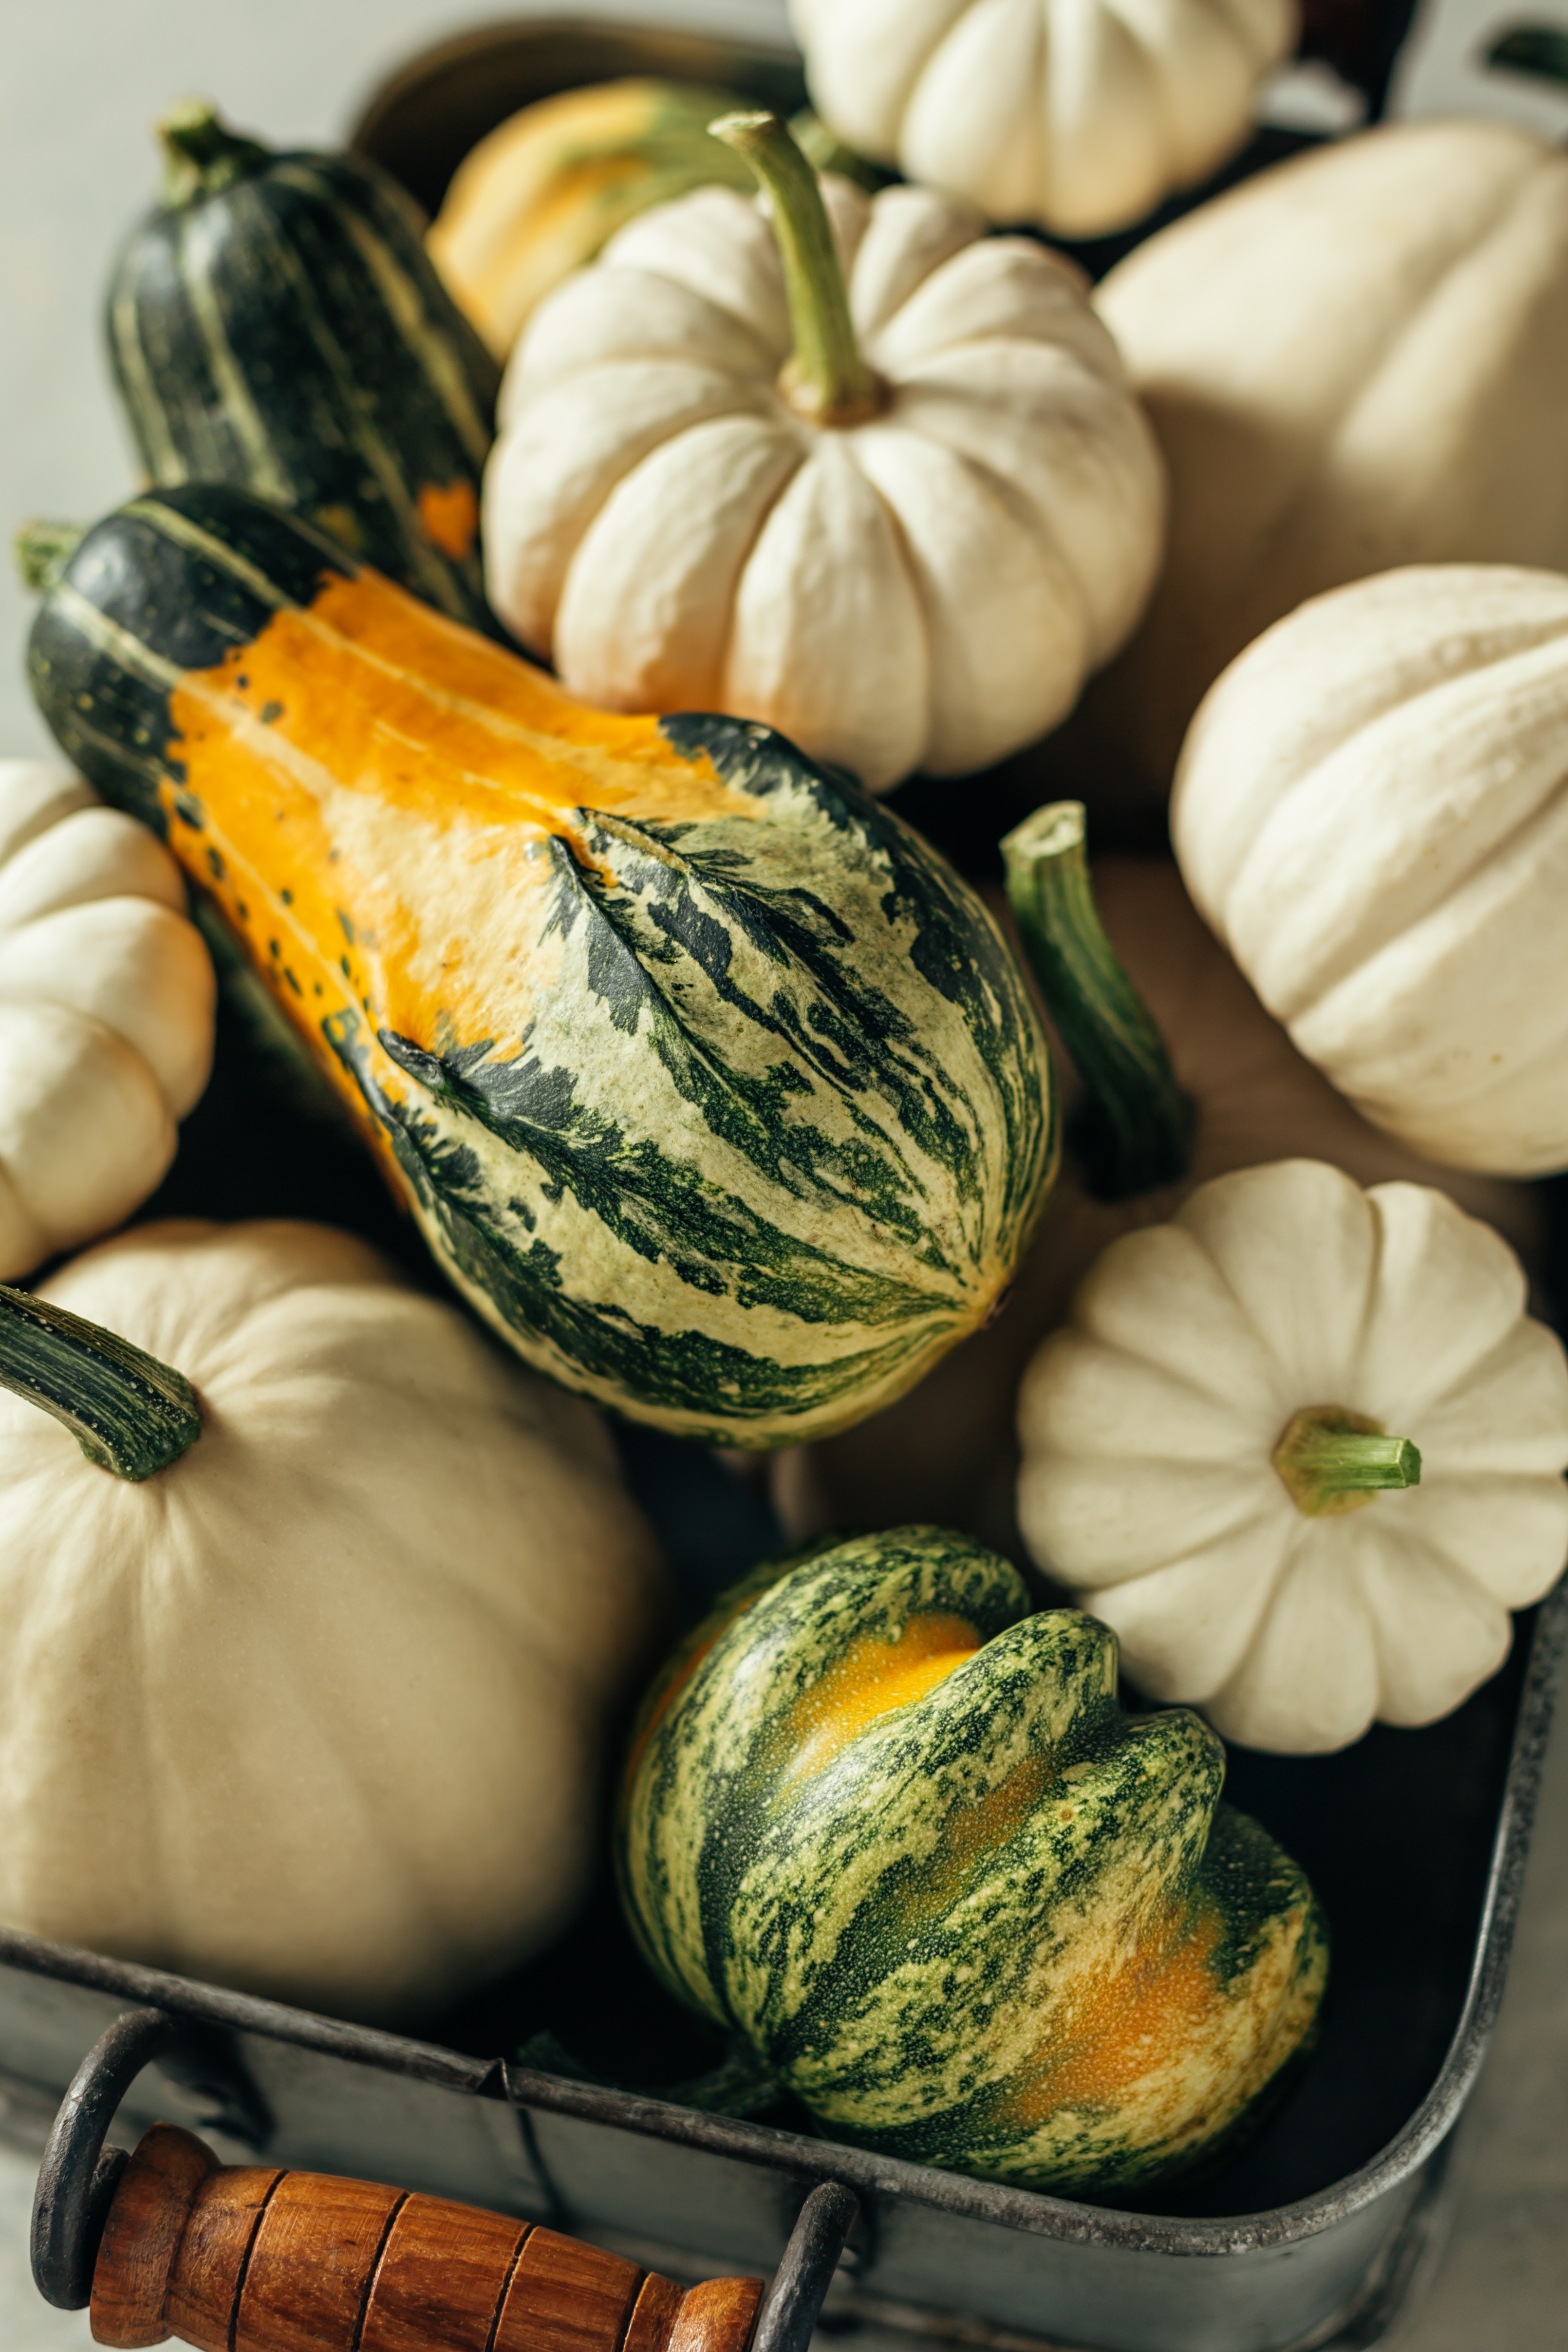  These are the seasonal foods you have to consume this fall